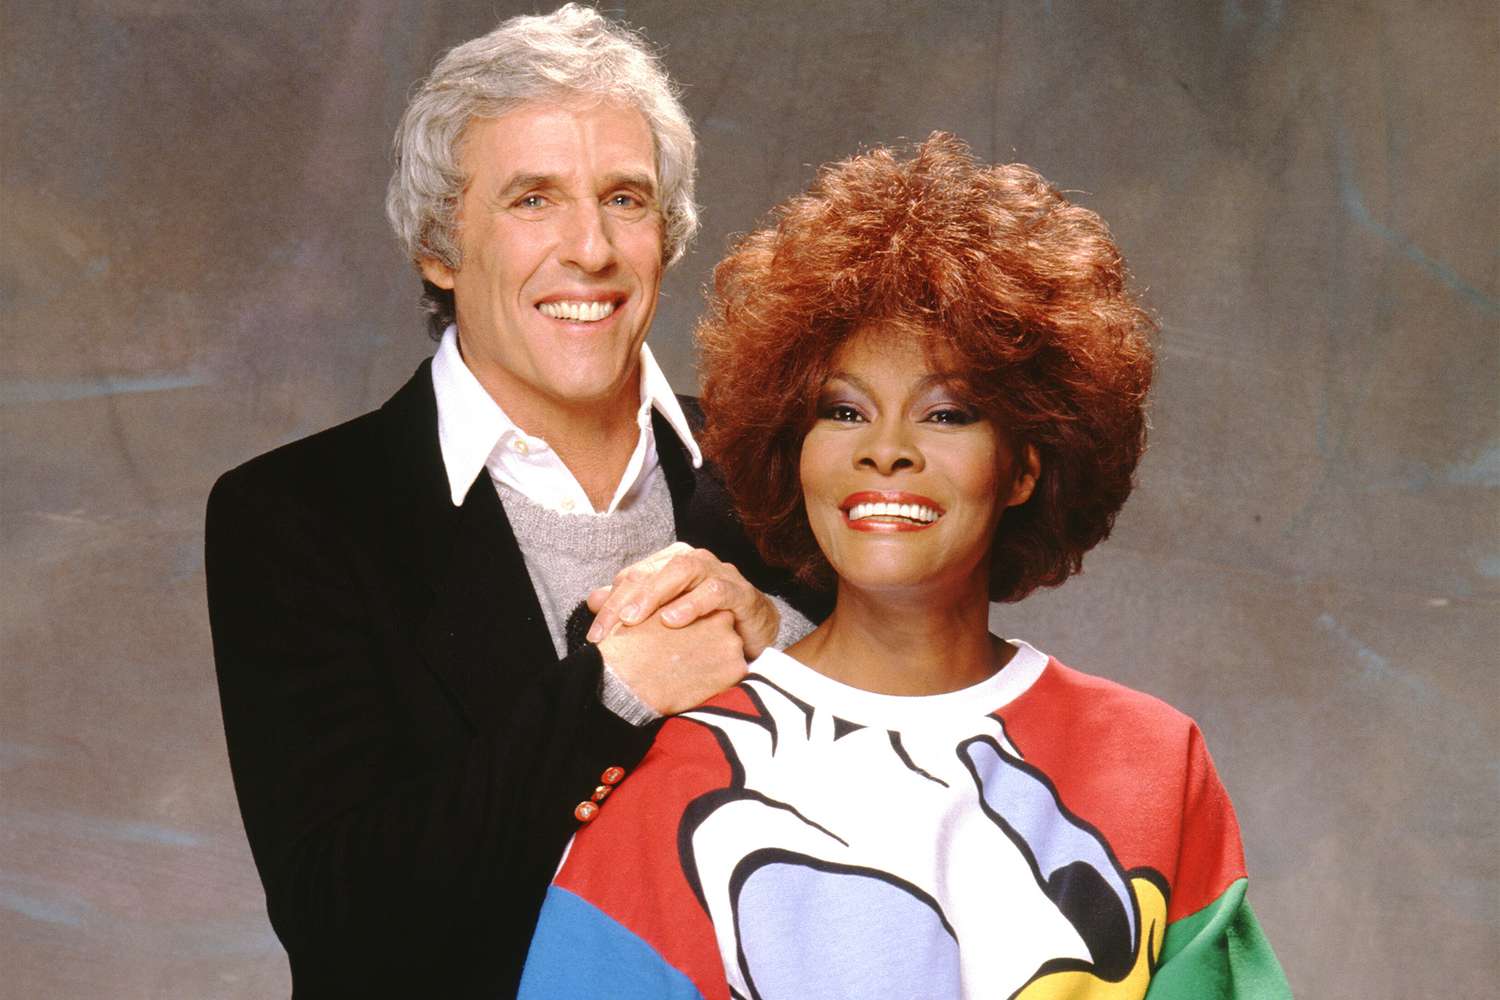 LOS ANGELES - 1989 singer Dionne Warwick and Burt Bacharach pose for a portrait in 1989 in Los Angeles, California. (Photo by Harry Langdon Getty Images)